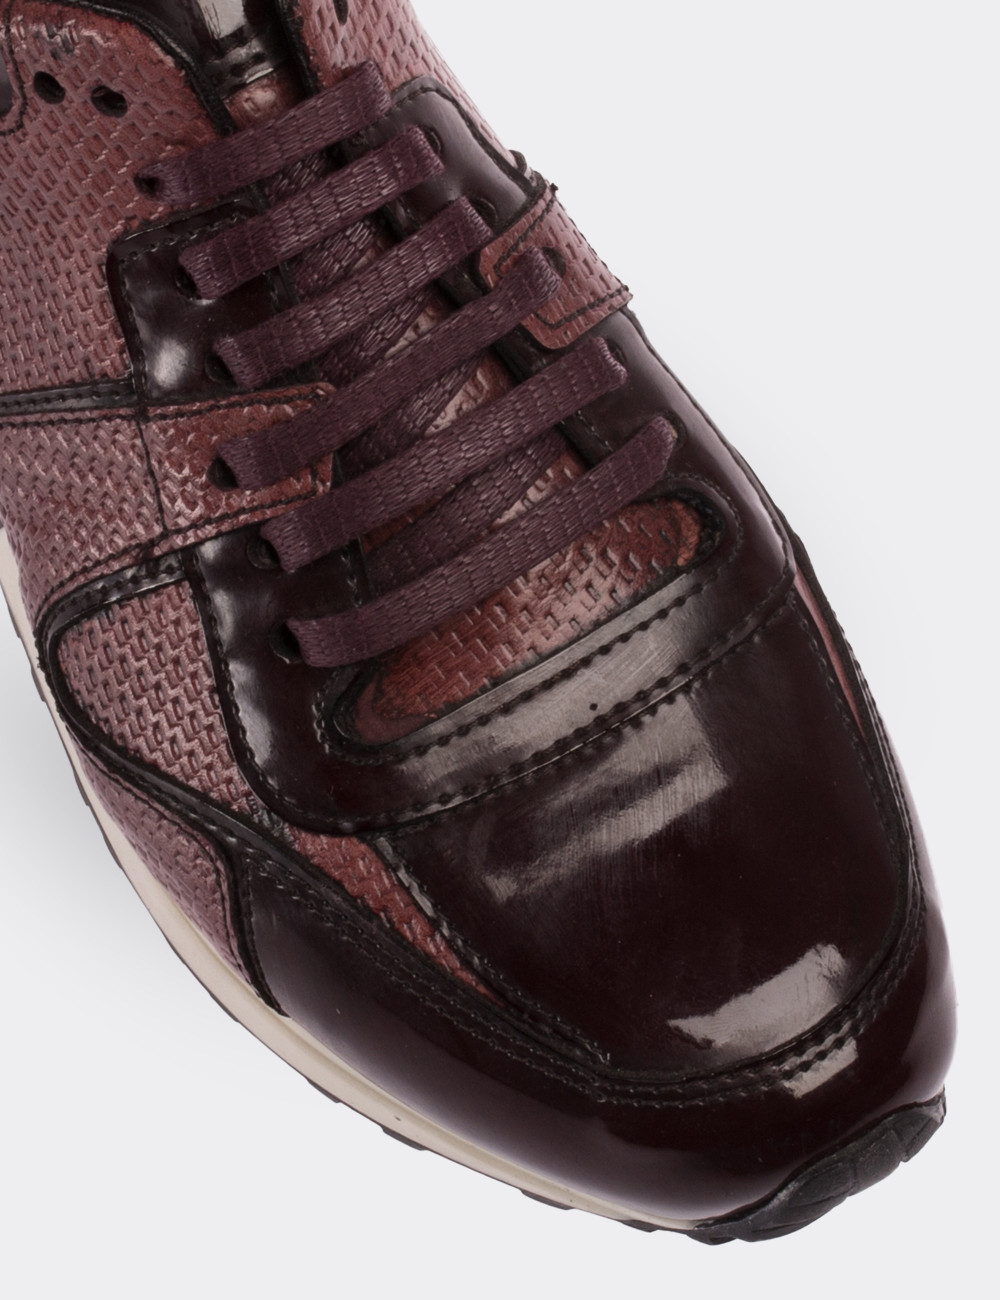 Burgundy Patent Leather Sneakers - 01522ZBRDT01